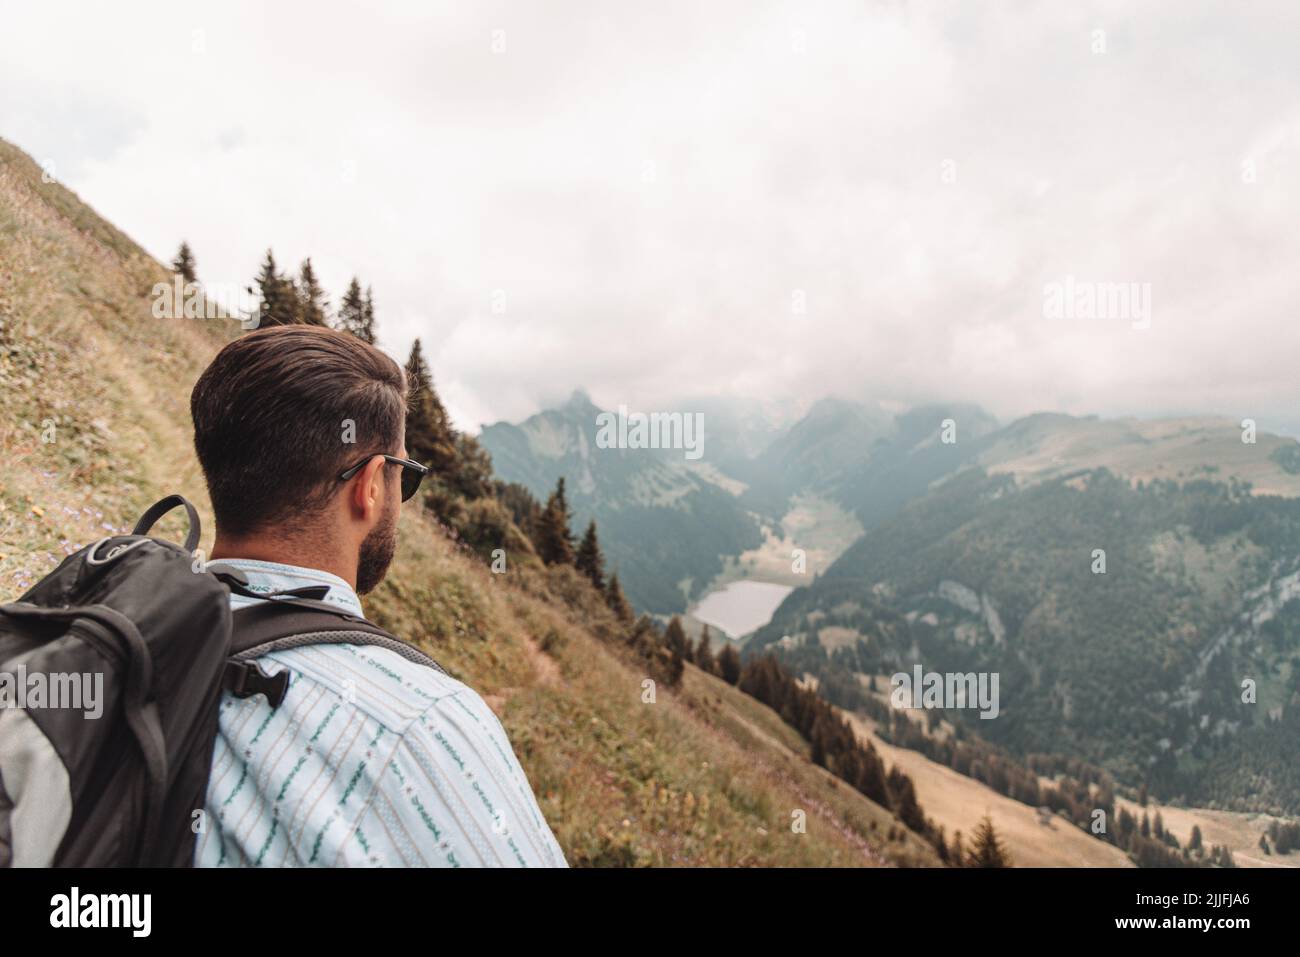 A young man hiking in the Appenzell Alps in Switzerland in cloudy sky background Stock Photo